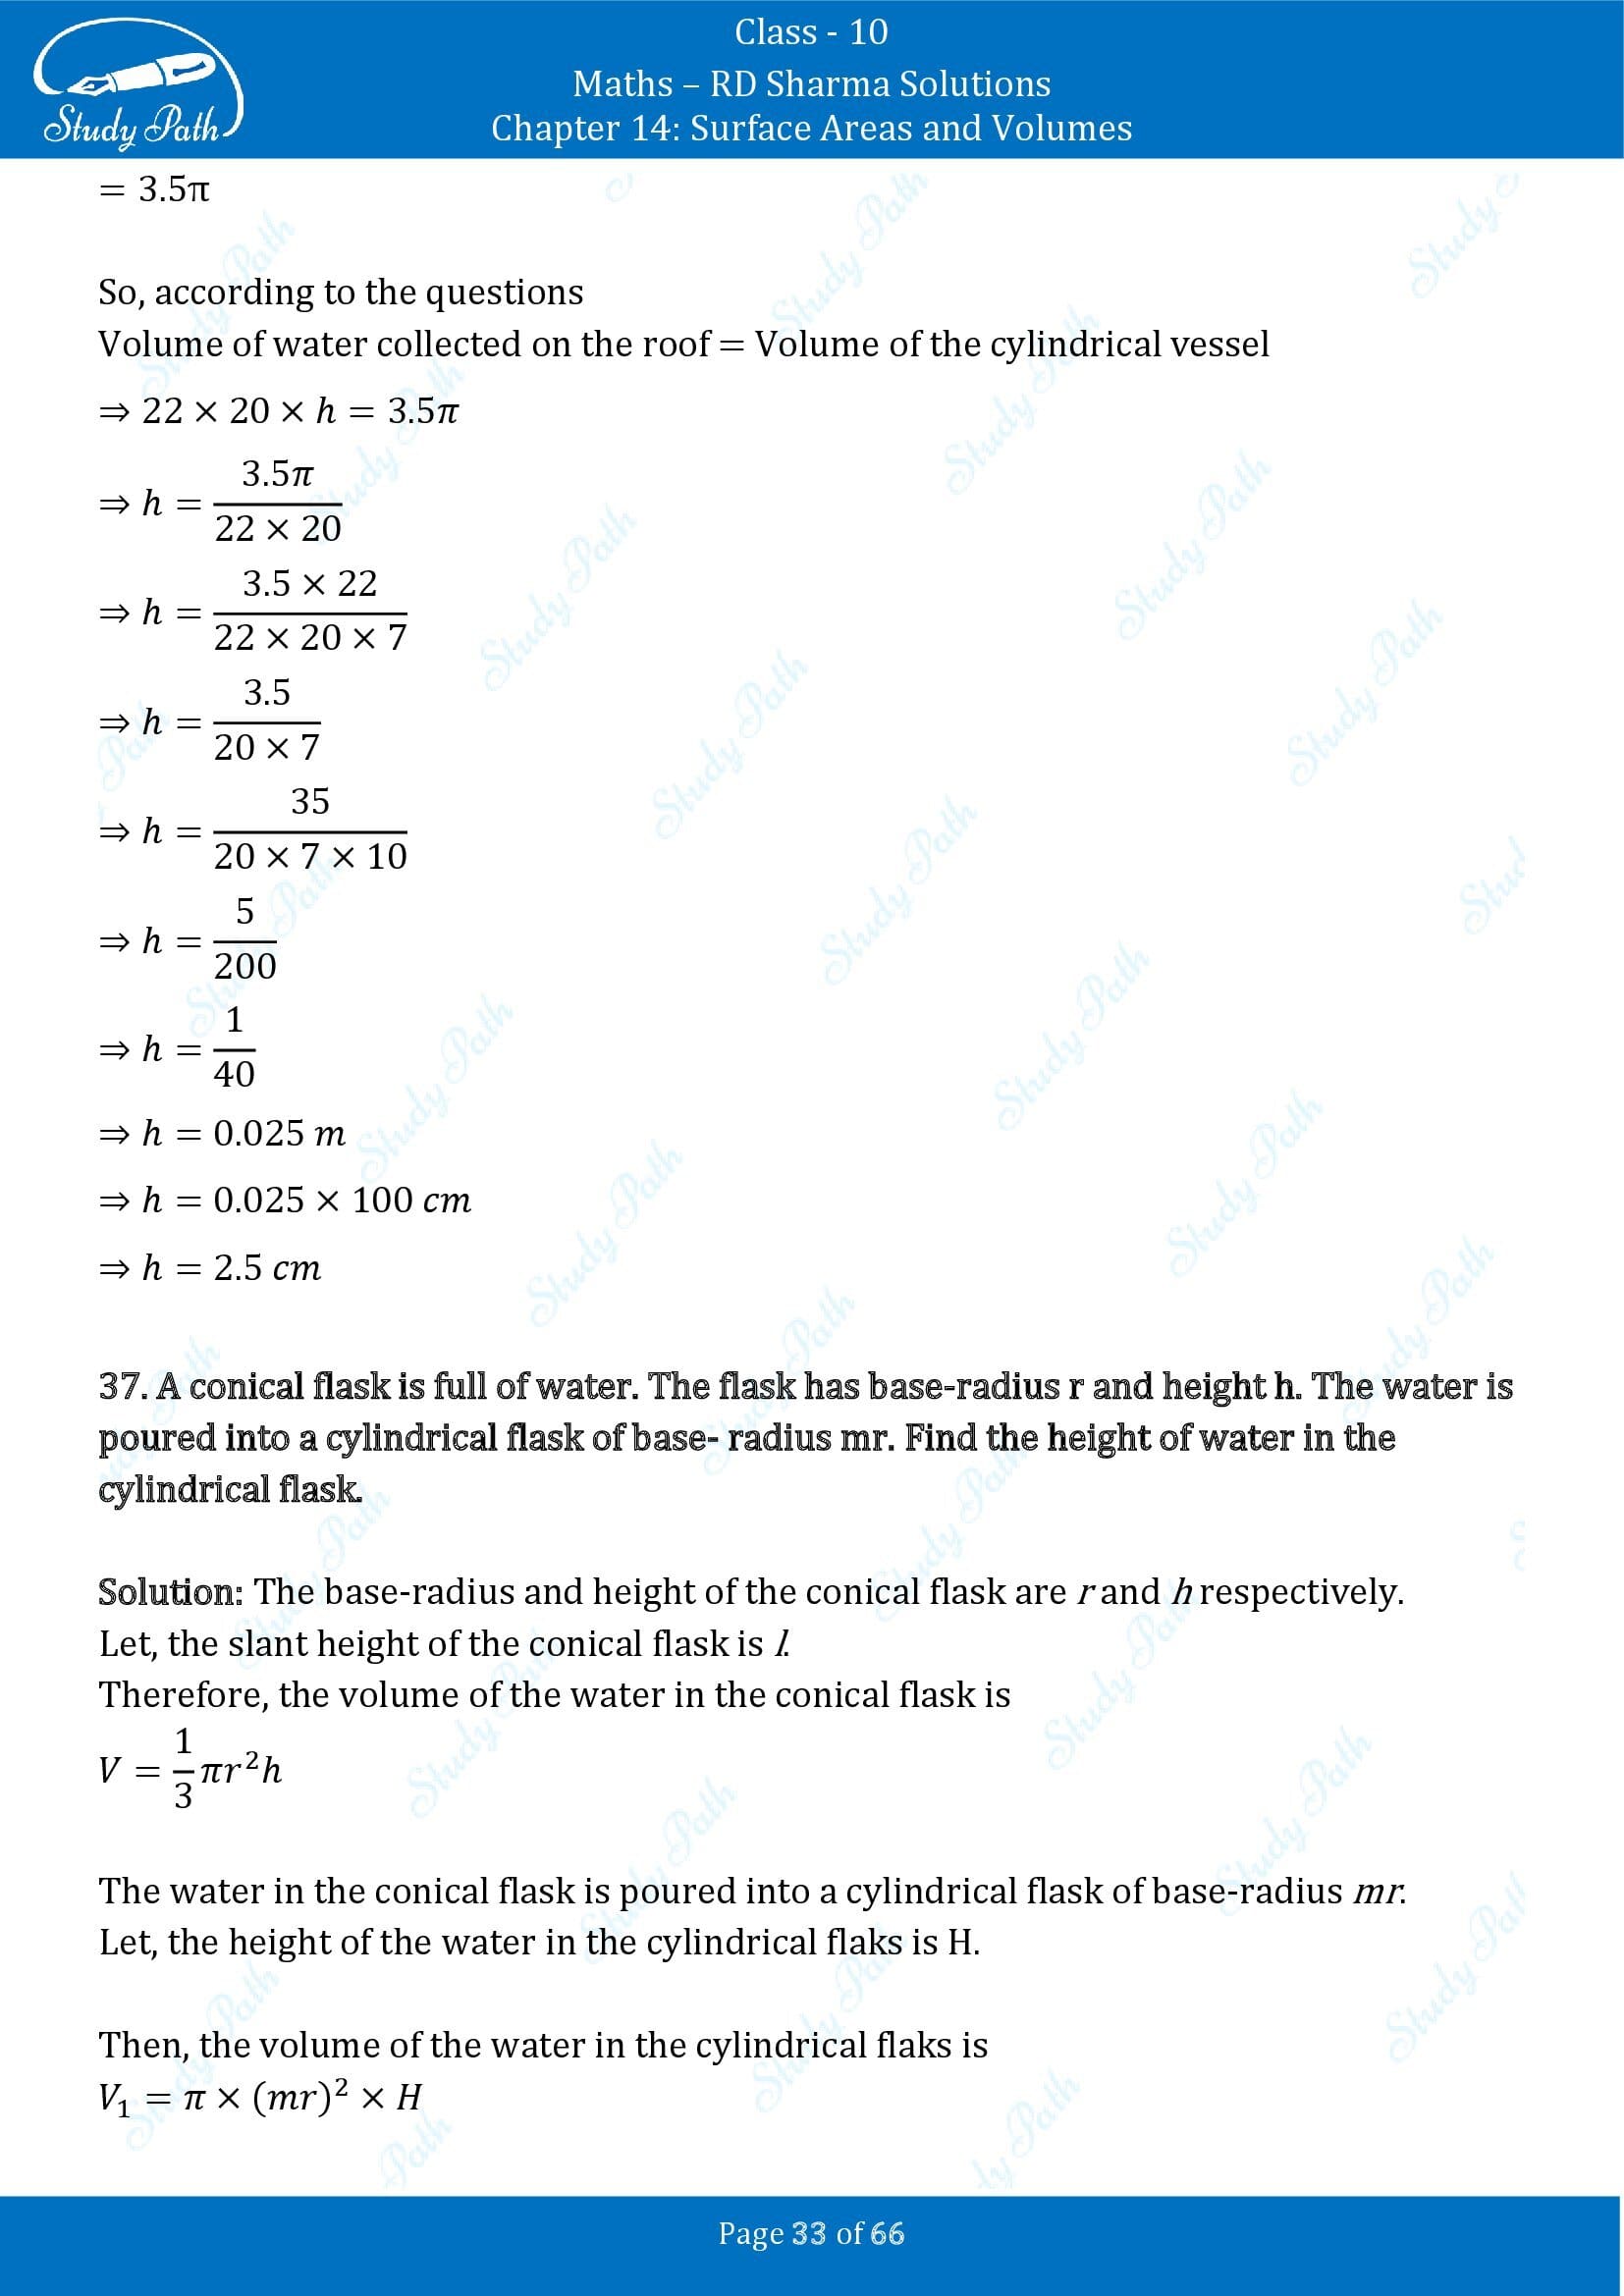 RD Sharma Solutions Class 10 Chapter 14 Surface Areas and Volumes Exercise 14.1 00033